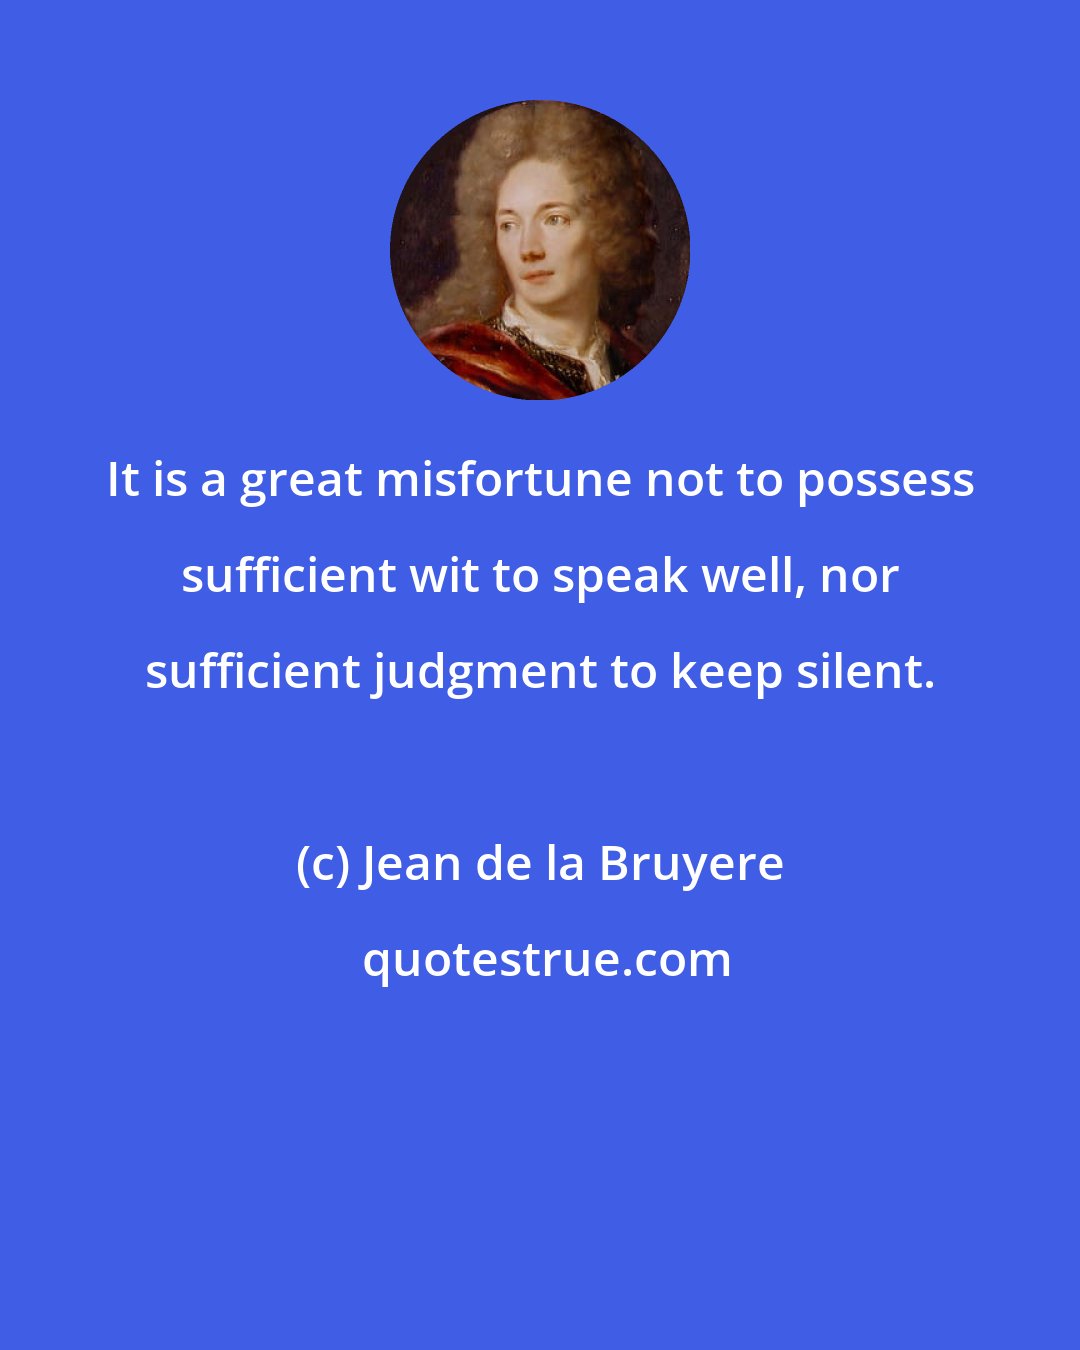 Jean de la Bruyere: It is a great misfortune not to possess sufficient wit to speak well, nor sufficient judgment to keep silent.